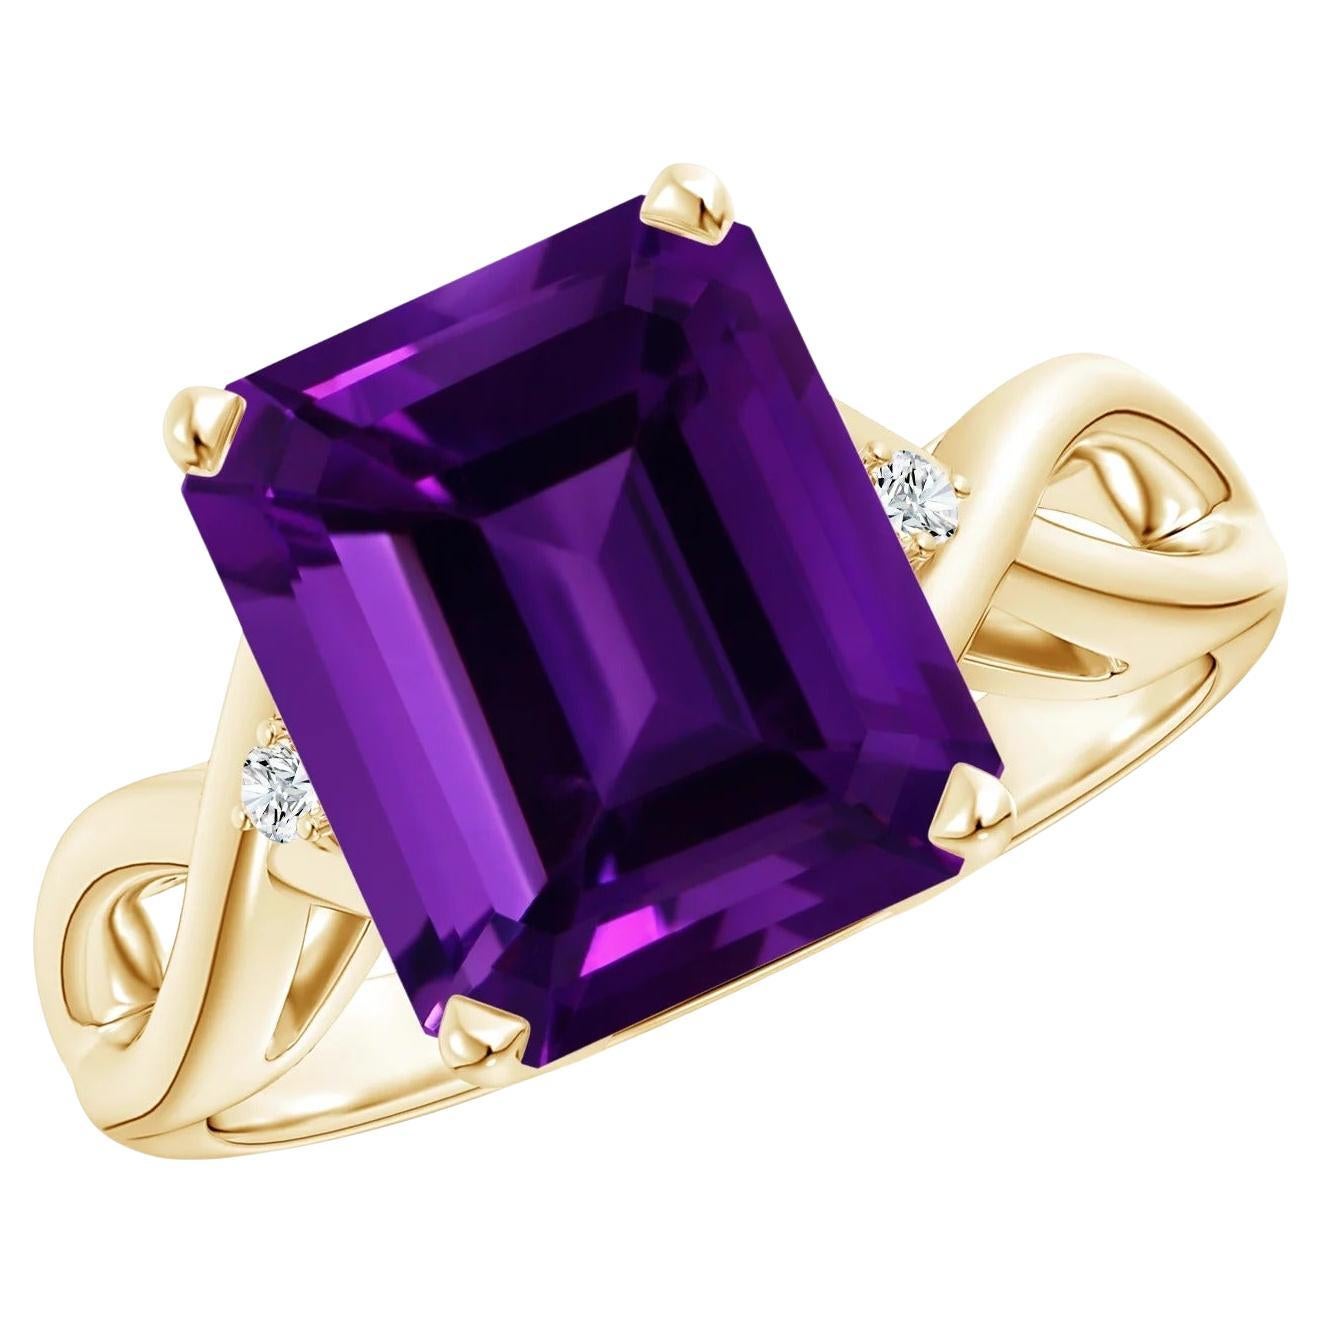 For Sale:  Angara GIA Certified Natural Amethyst Ring in Yellow Gold with Diamond Accents